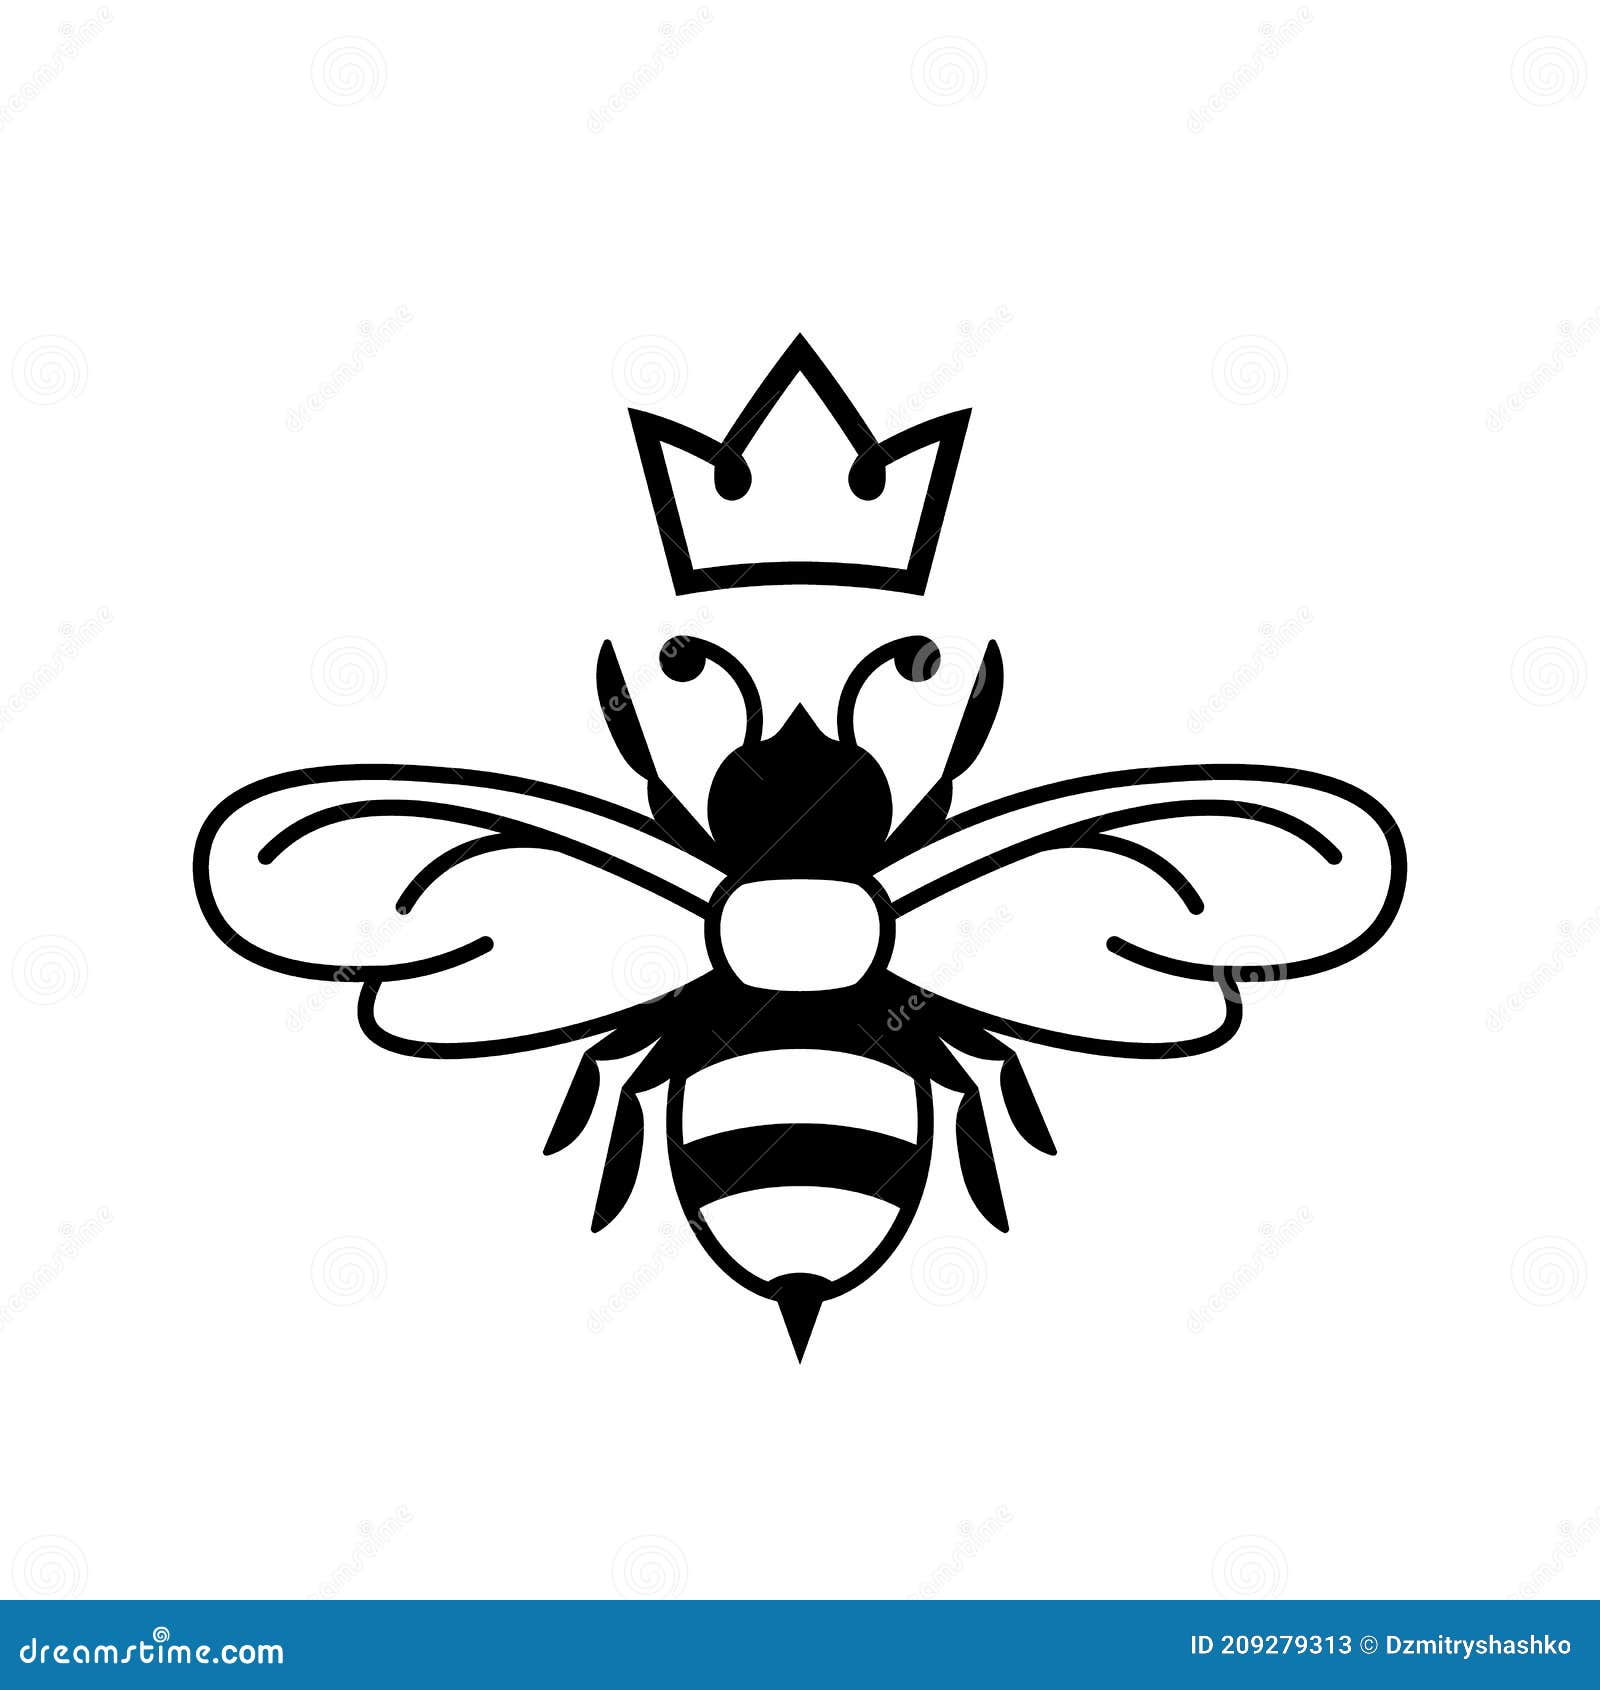 queen bee glyph icon.